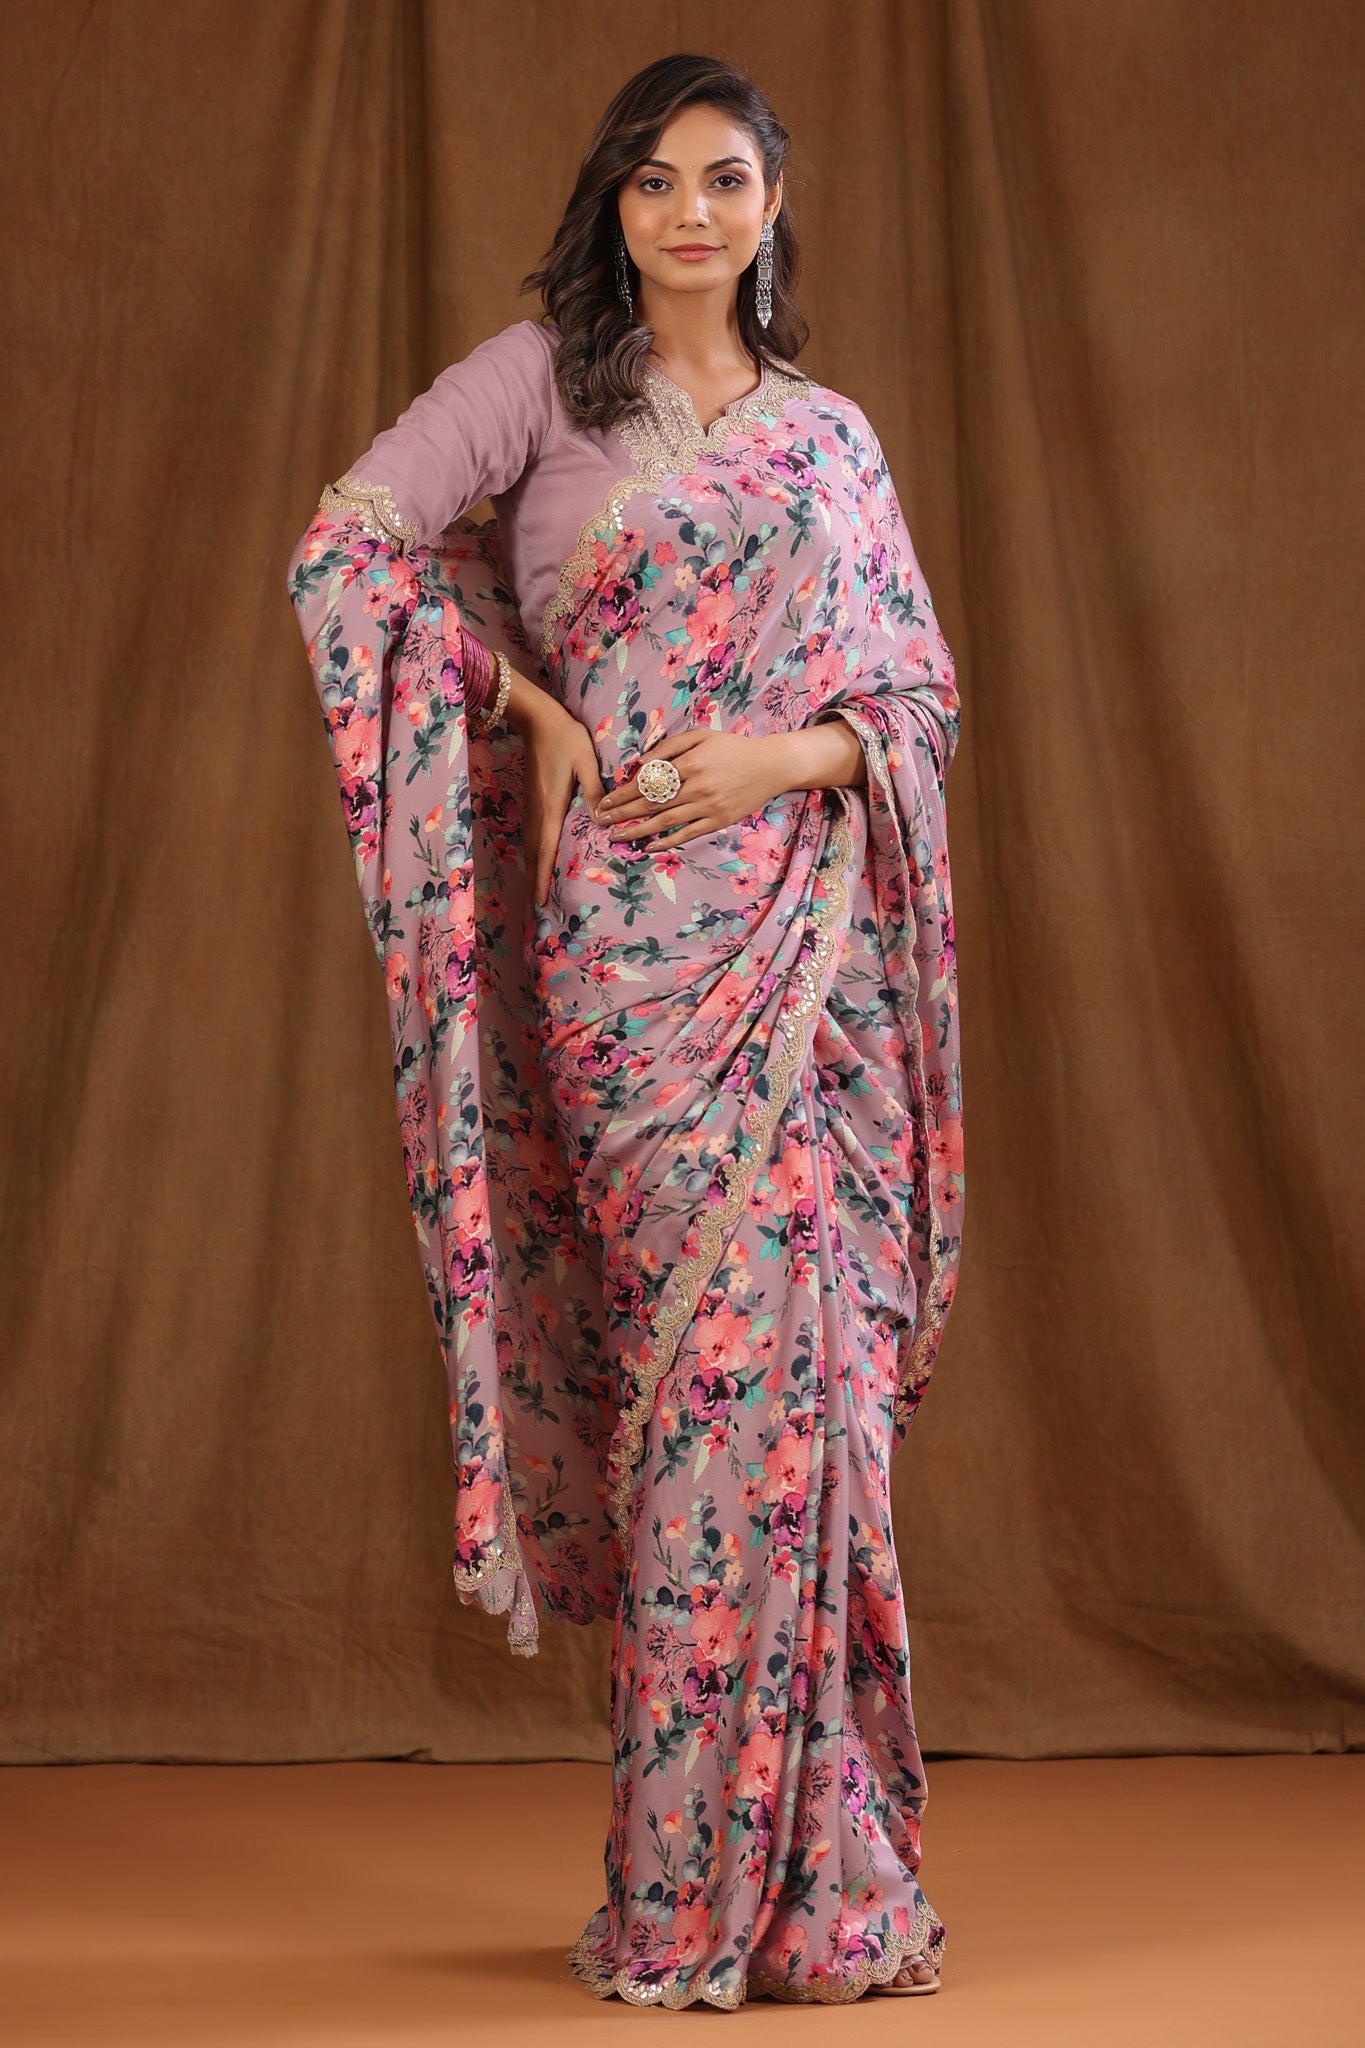 Buy beautiful onion pink floral crepe sari online in USA with scalloped border. Make a fashion statement at weddings with stunning designer sarees, embroidered sarees with blouse, wedding sarees, handloom sarees from Pure Elegance Indian fashion store in USA.-full view